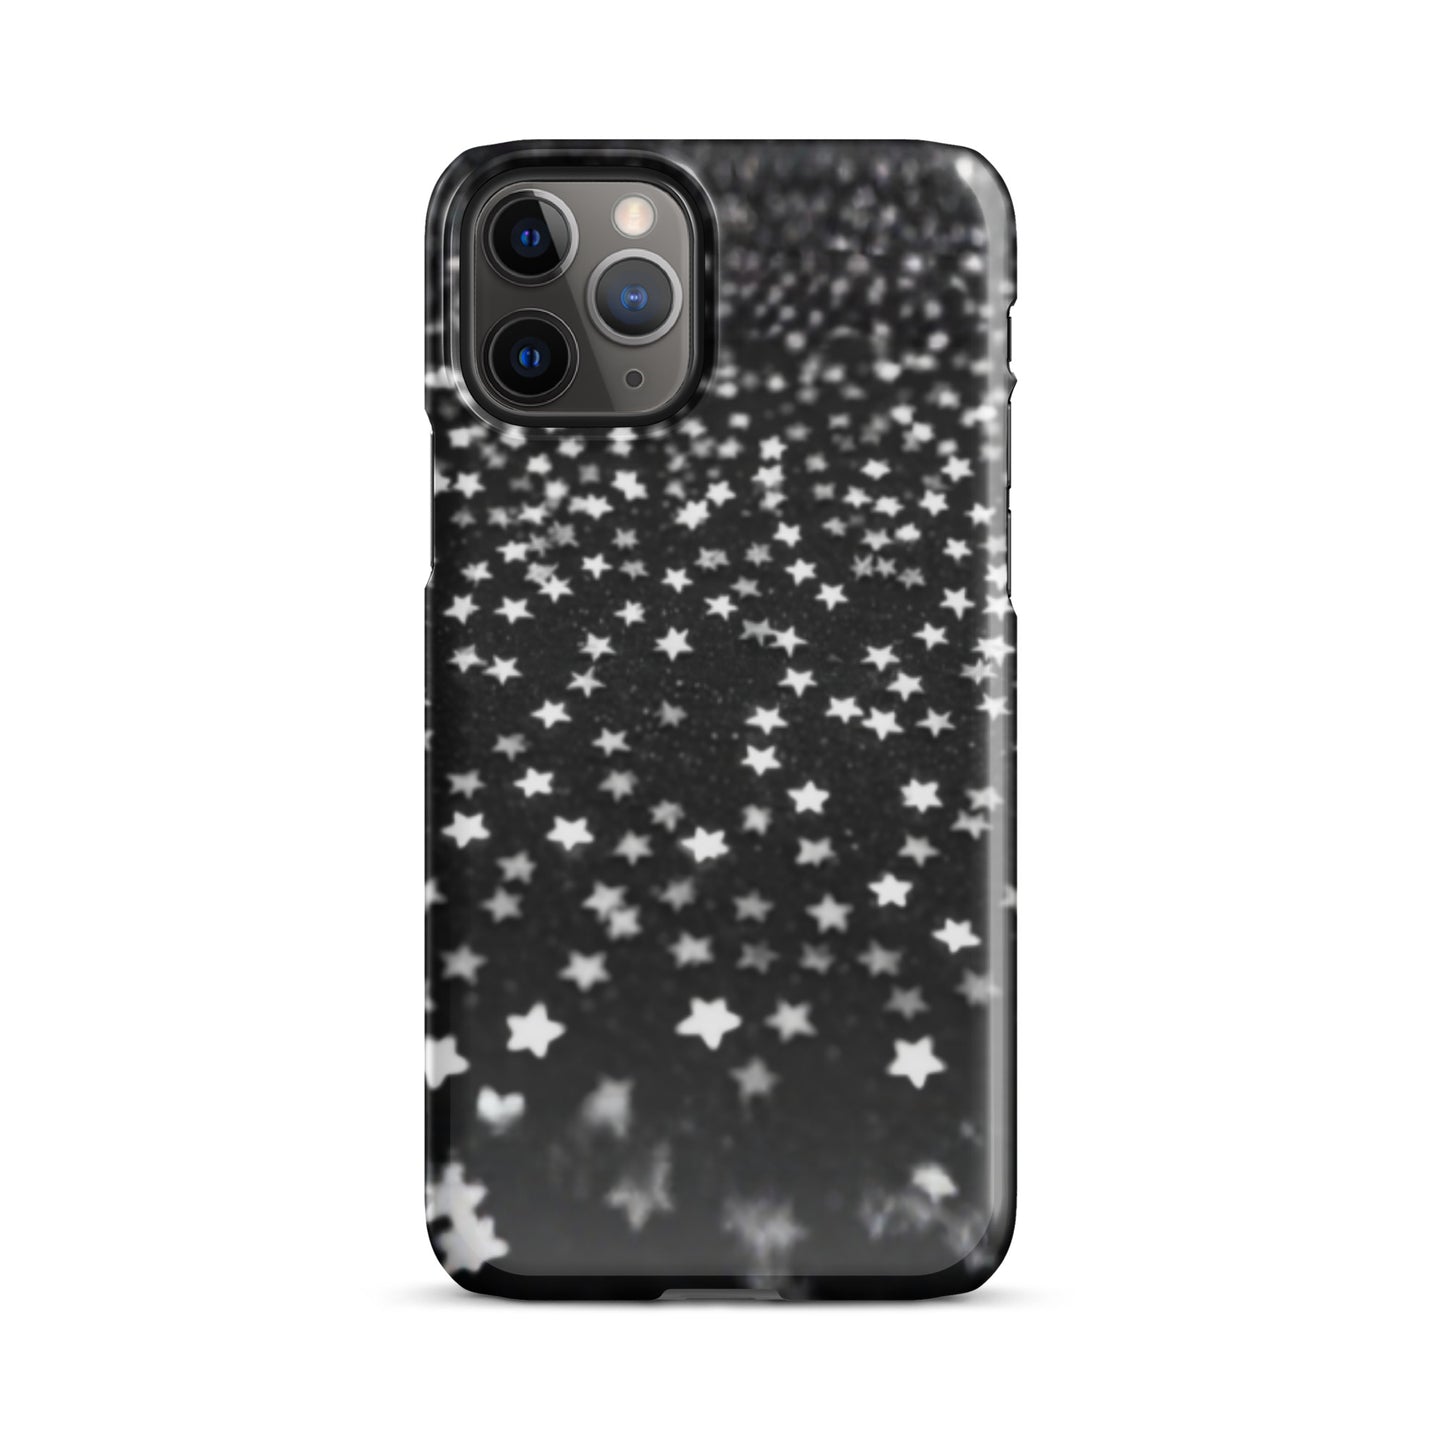 Starry Iphone Case